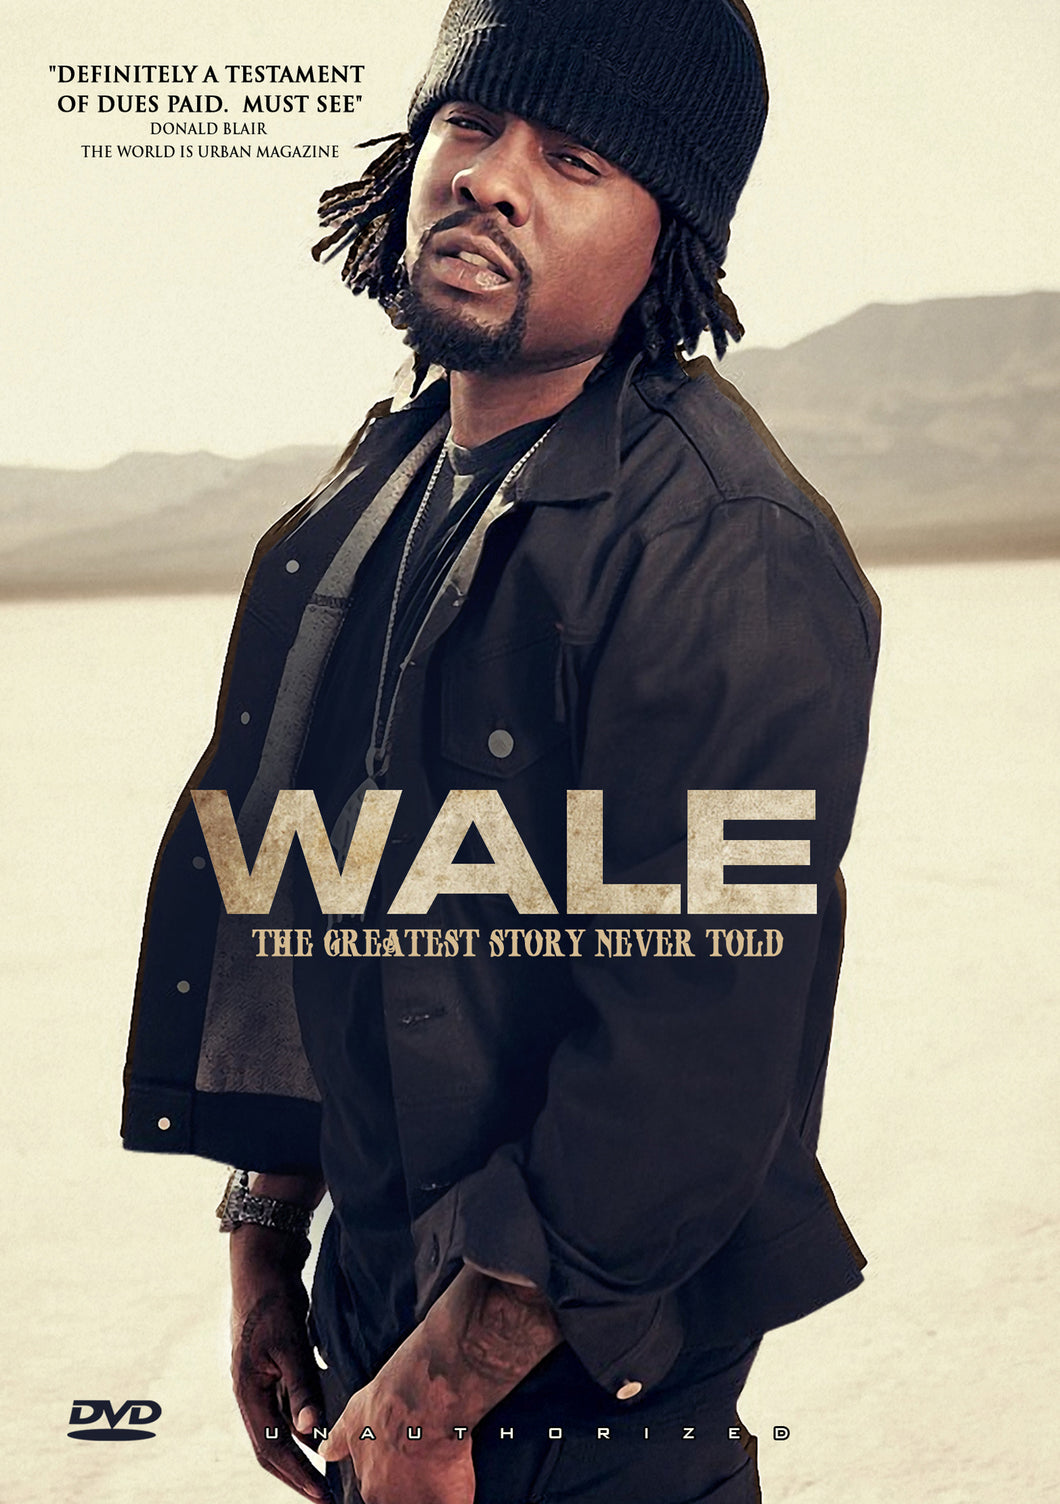 Wale - The Greatest Story Never Told (DVD)